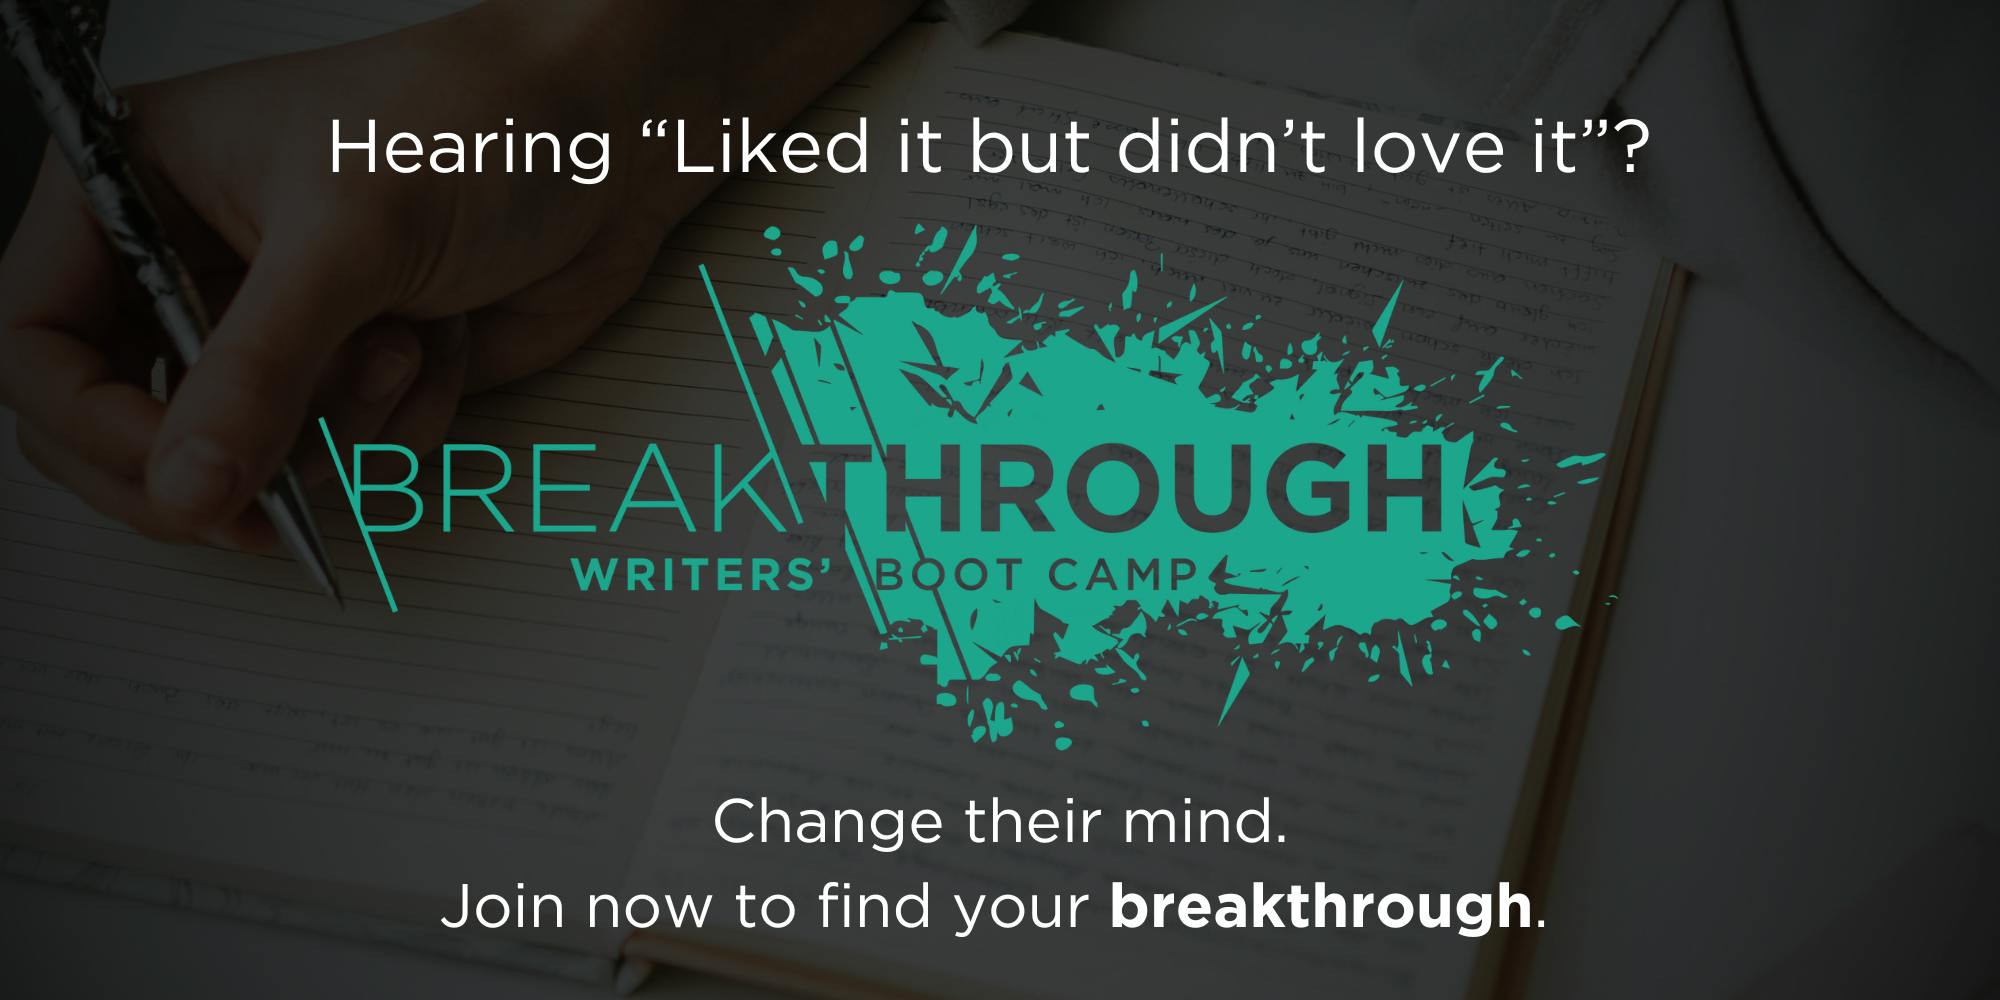 Breakthrough Writers' Boot Camp. Hearing "Liked it but didn't love it"? Change their mind. Join now to find your breakthrough.